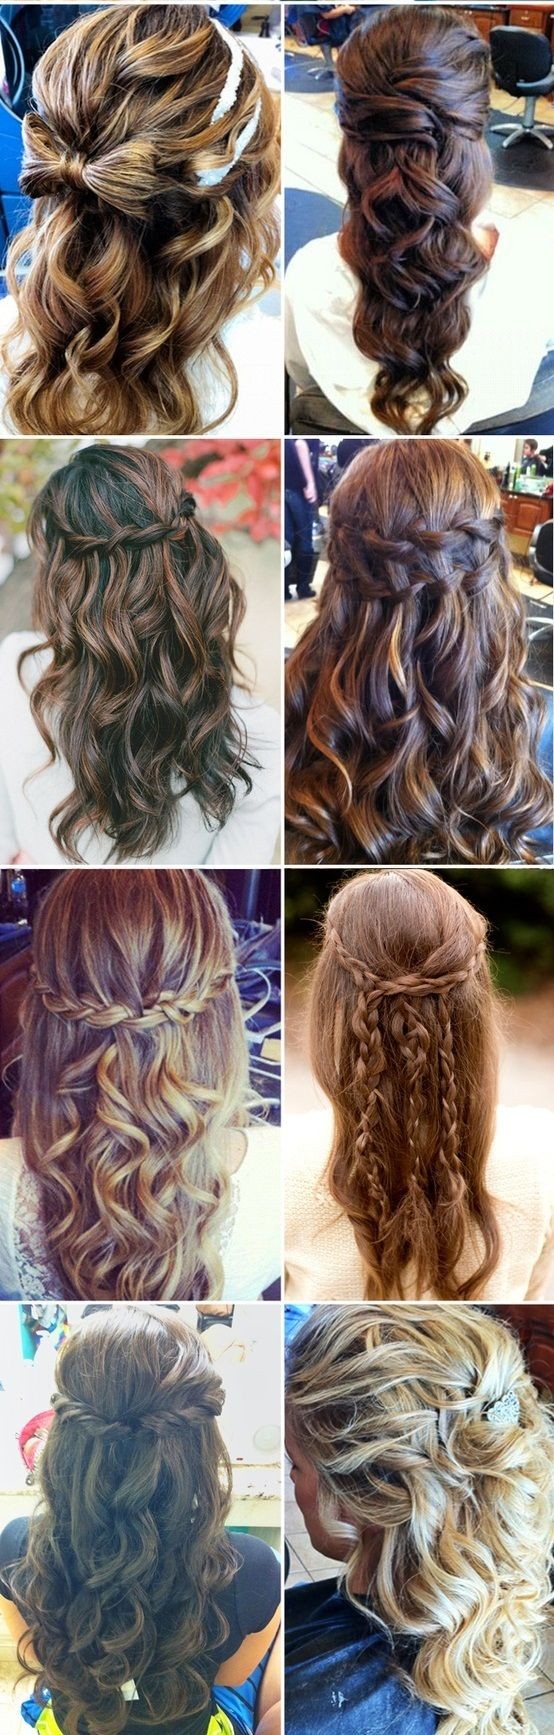 The top left bow is so cute and the bottom left! t...